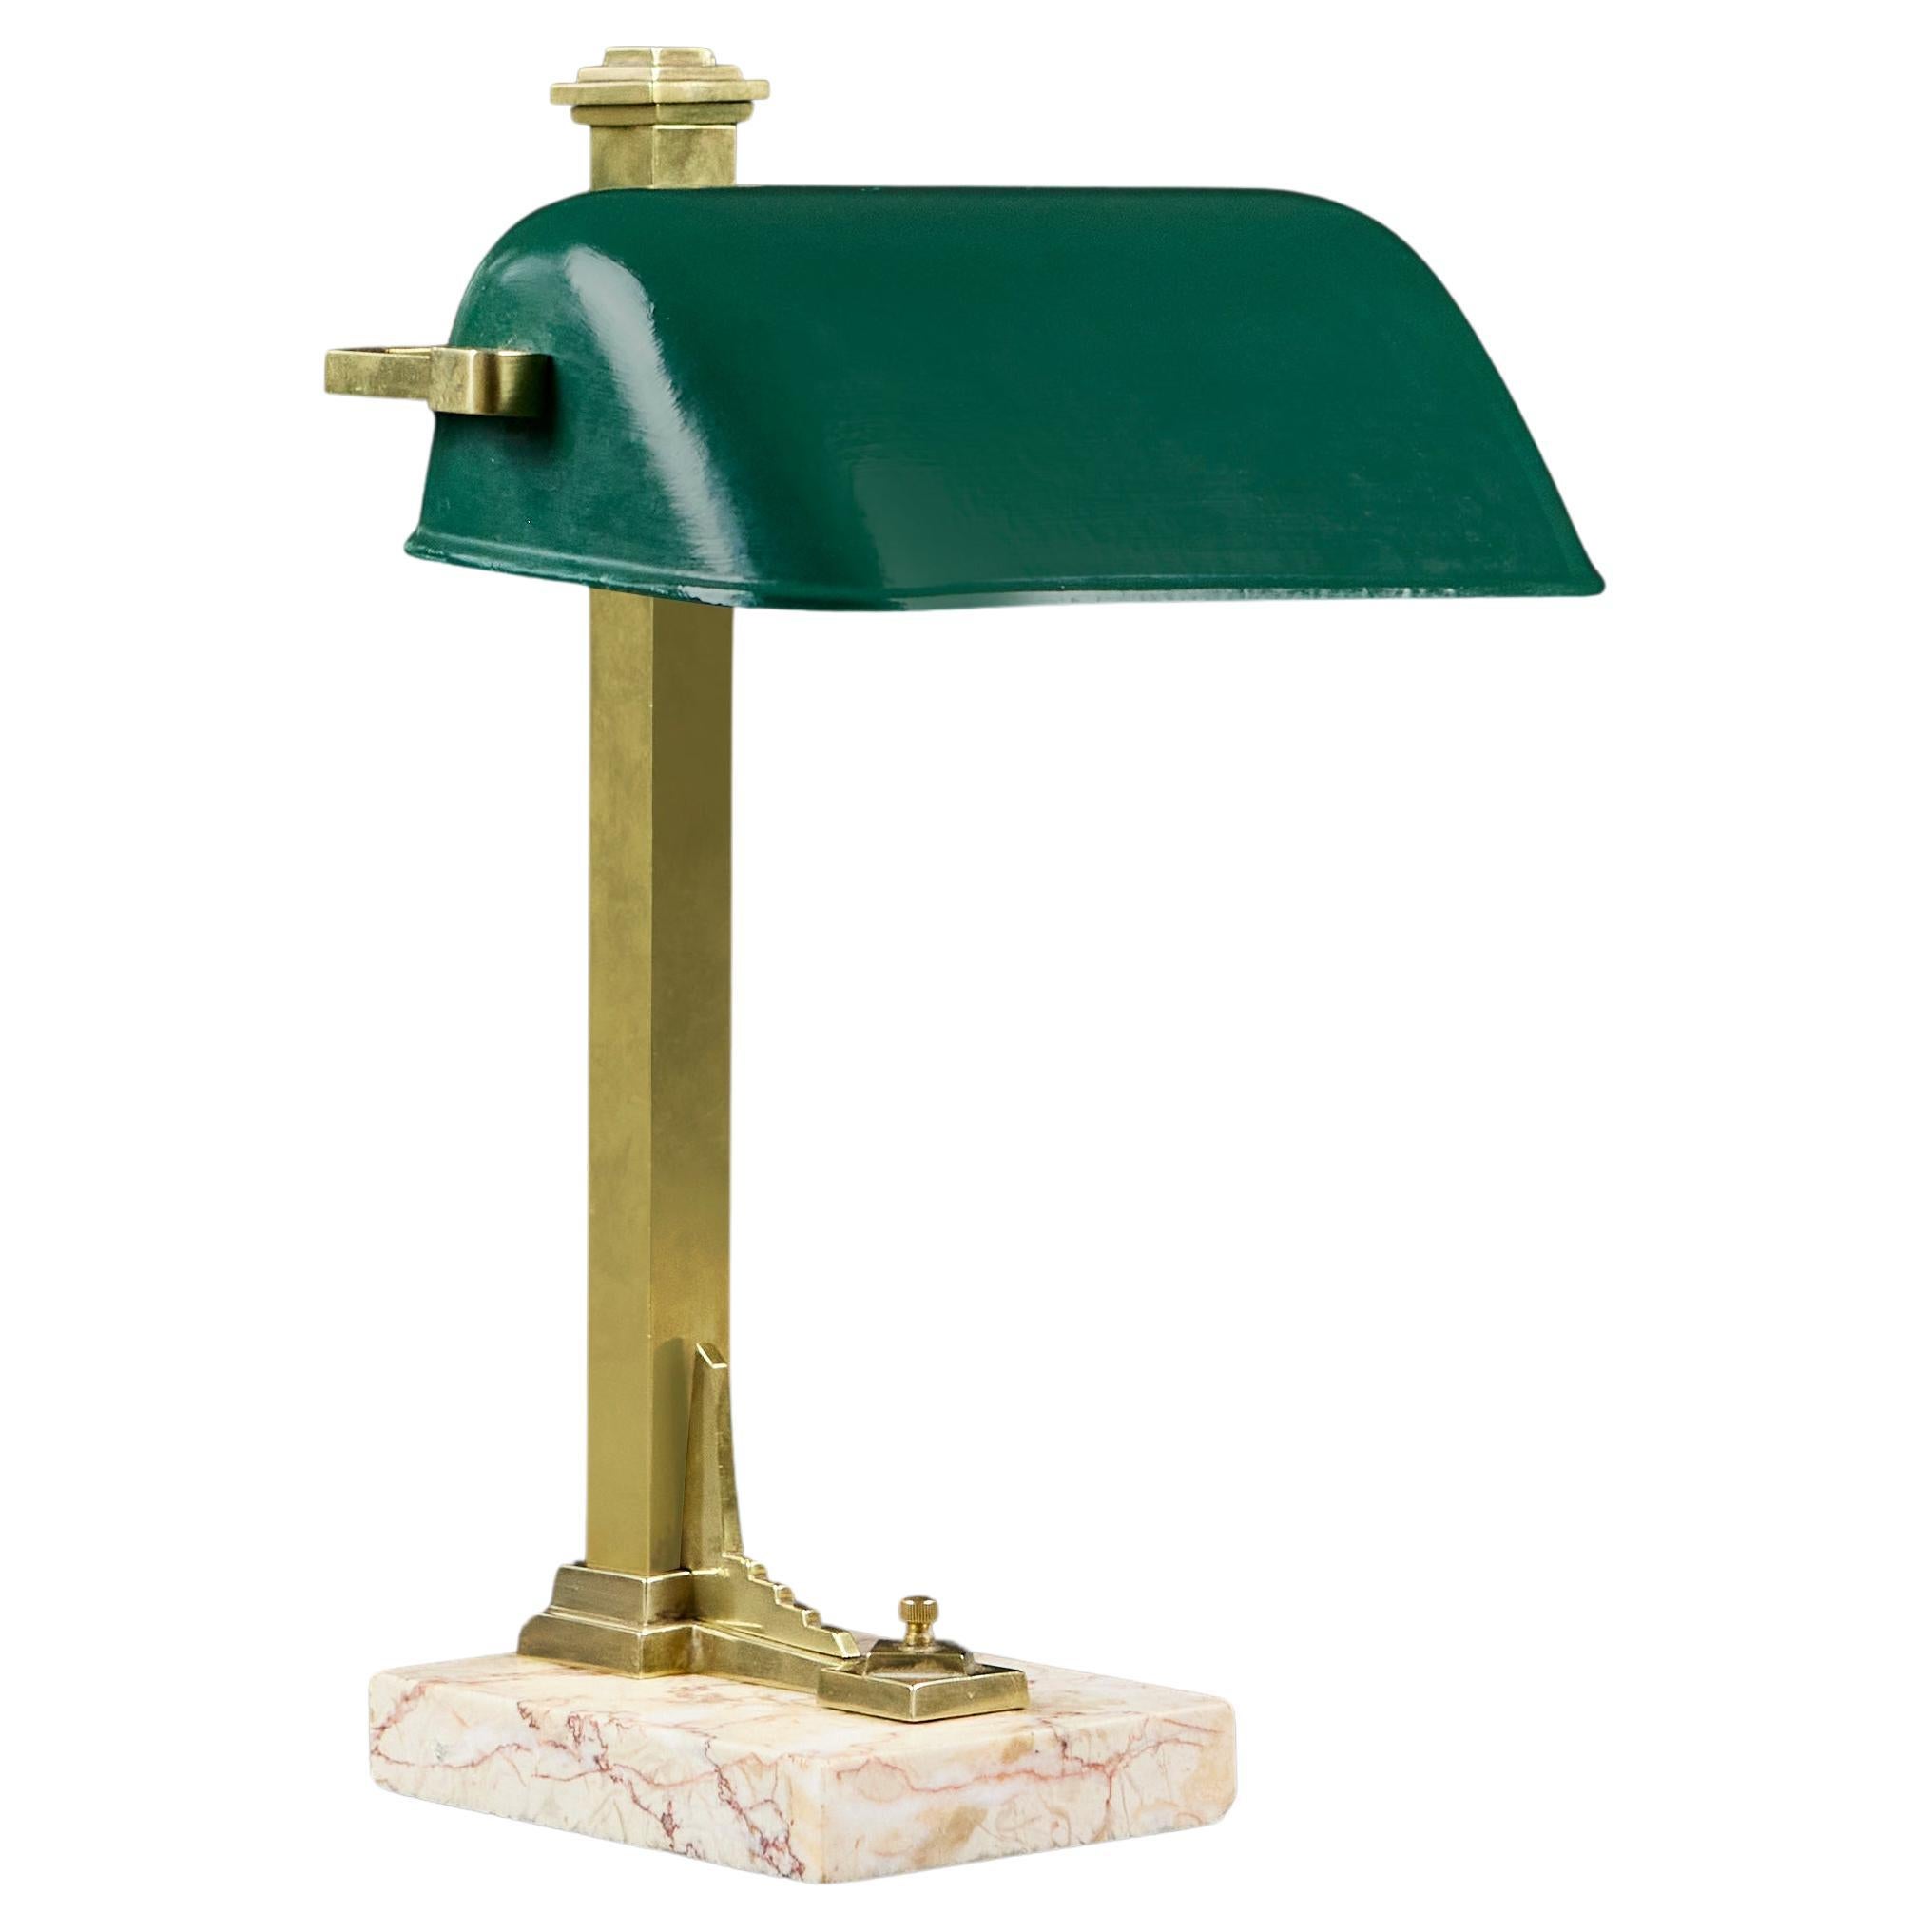 A 1930s French Art Deco Desk Lamp in Brass, Marble and Green Enamel For Sale